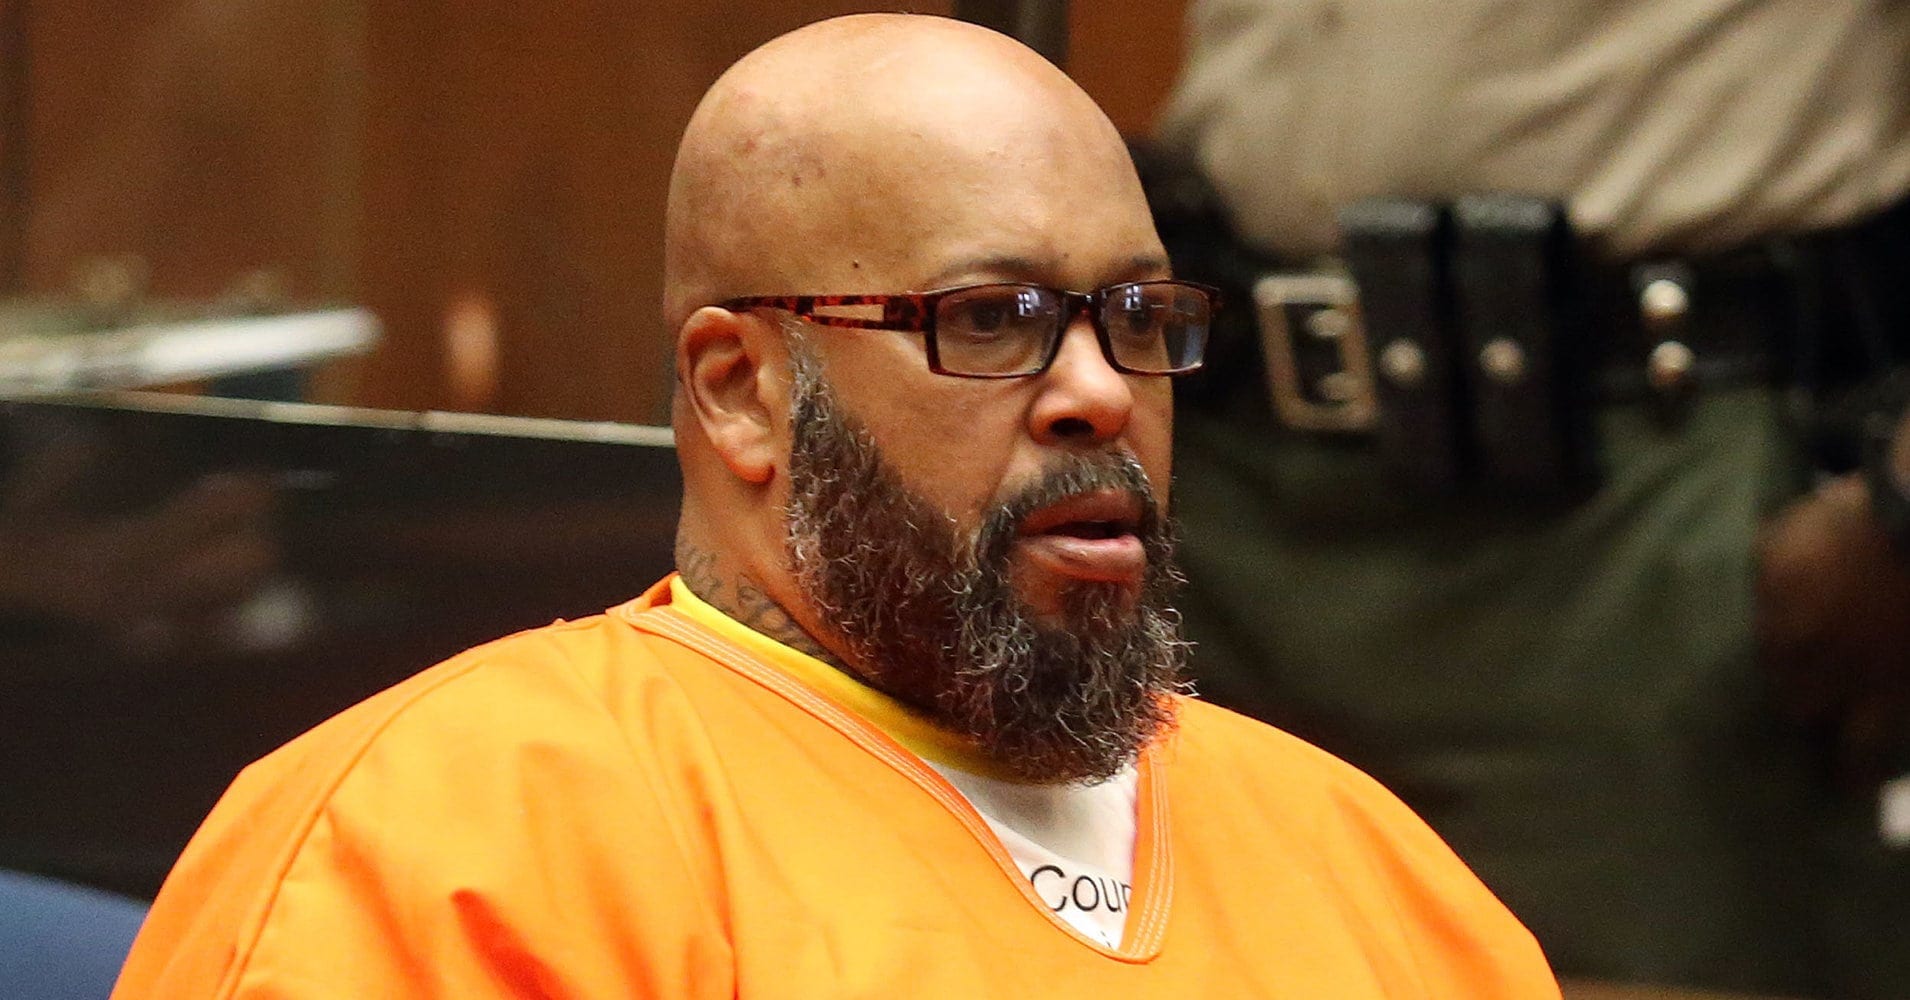 Suge Knight’s Plea Deal Gets Him 28 Years in Prison